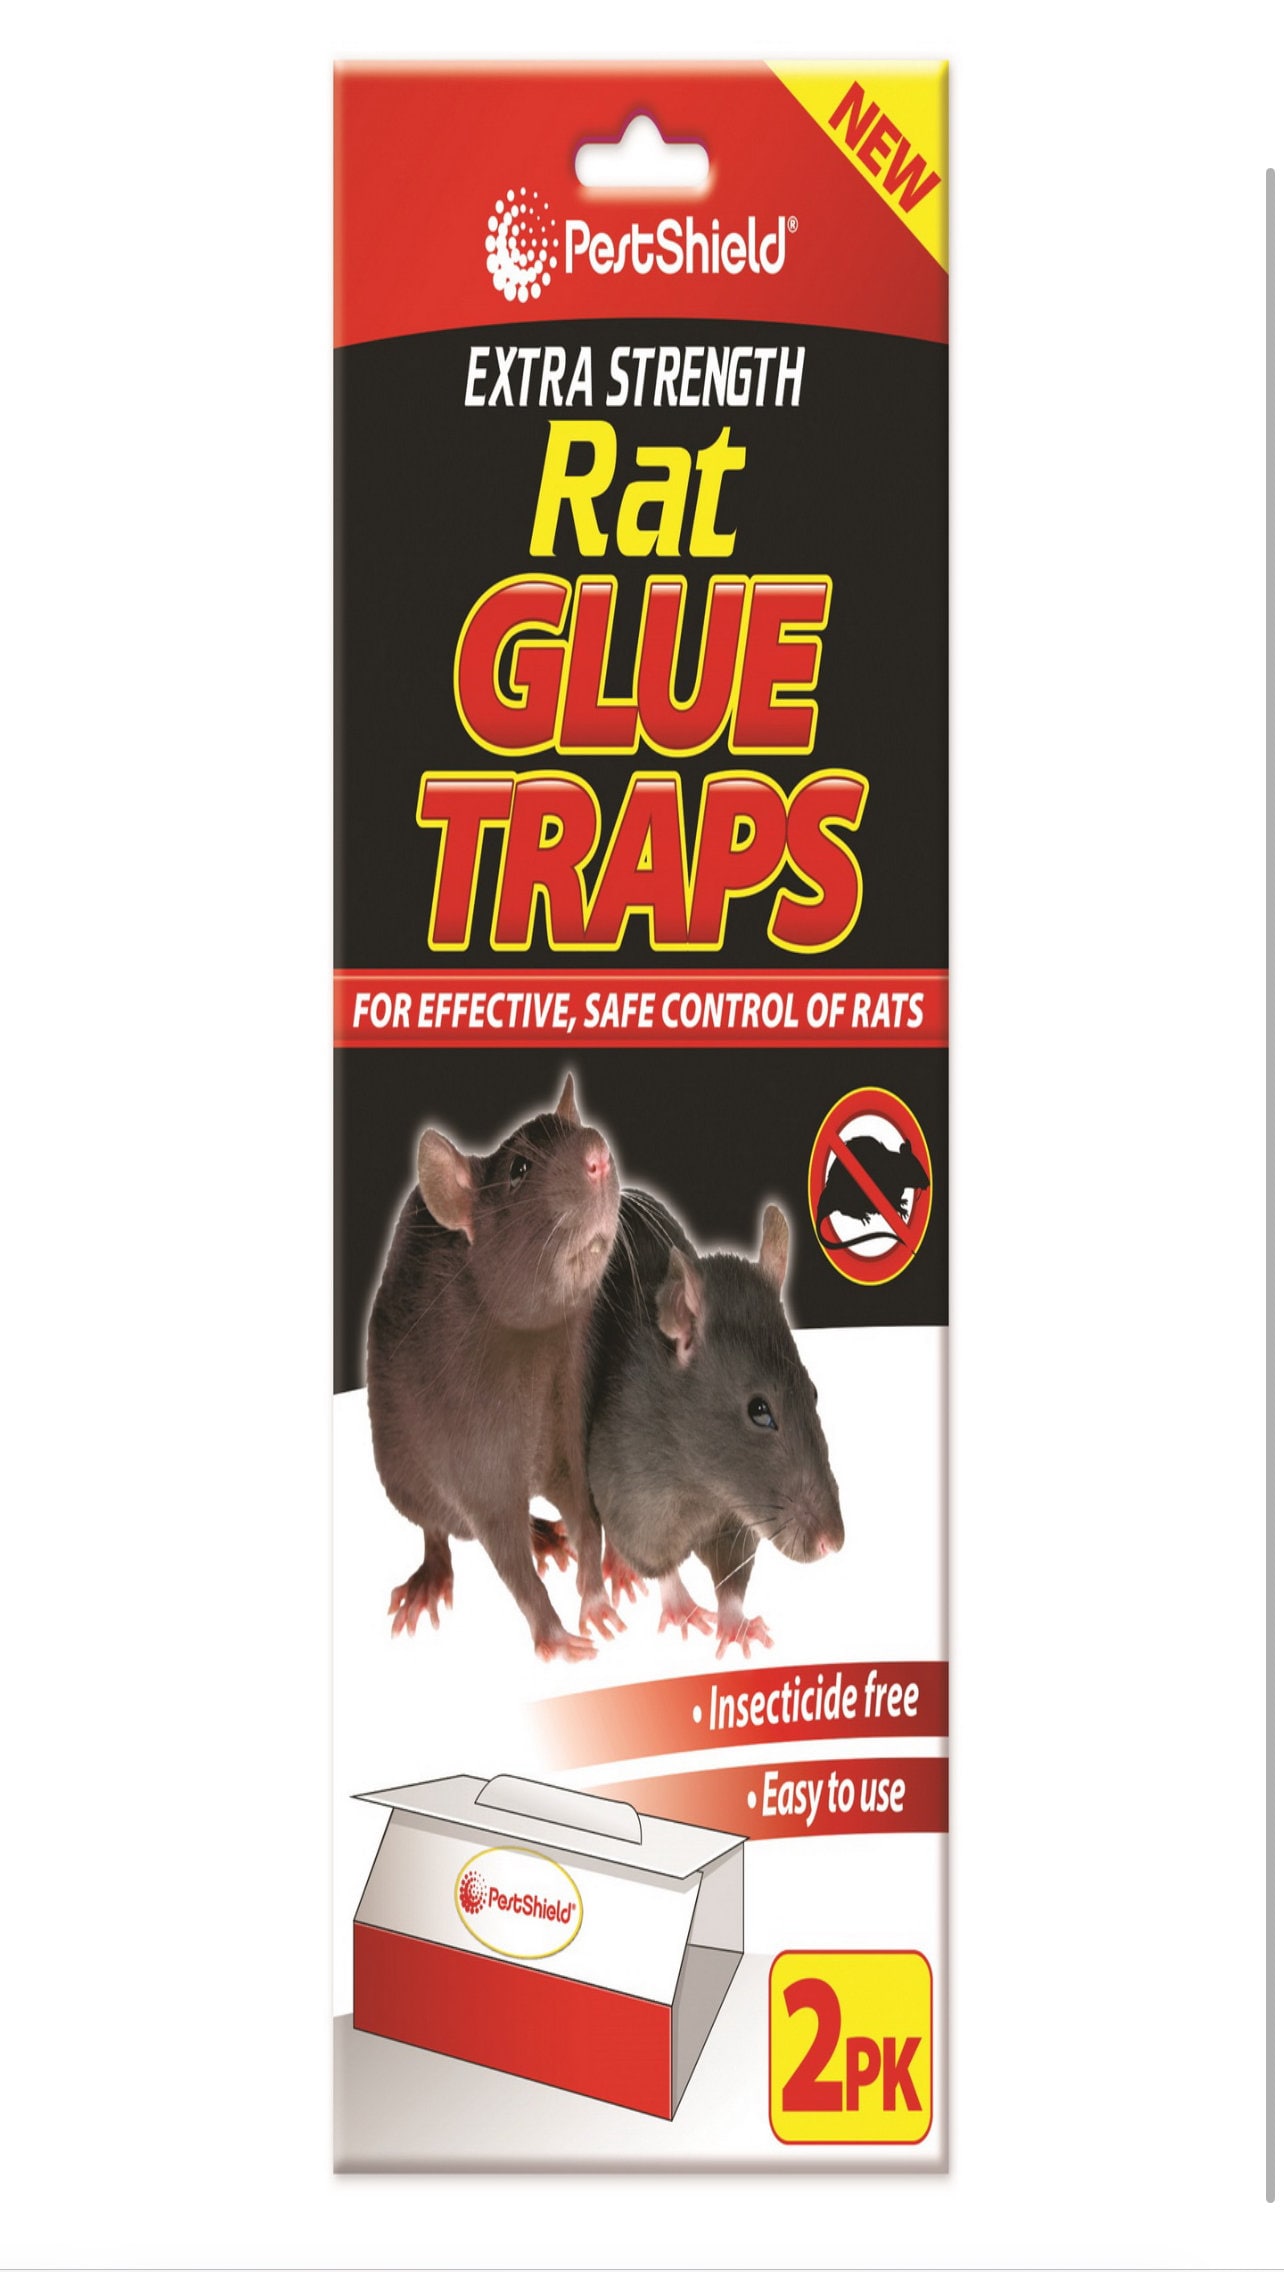 A Guide in Building a Bucket Rat Trap